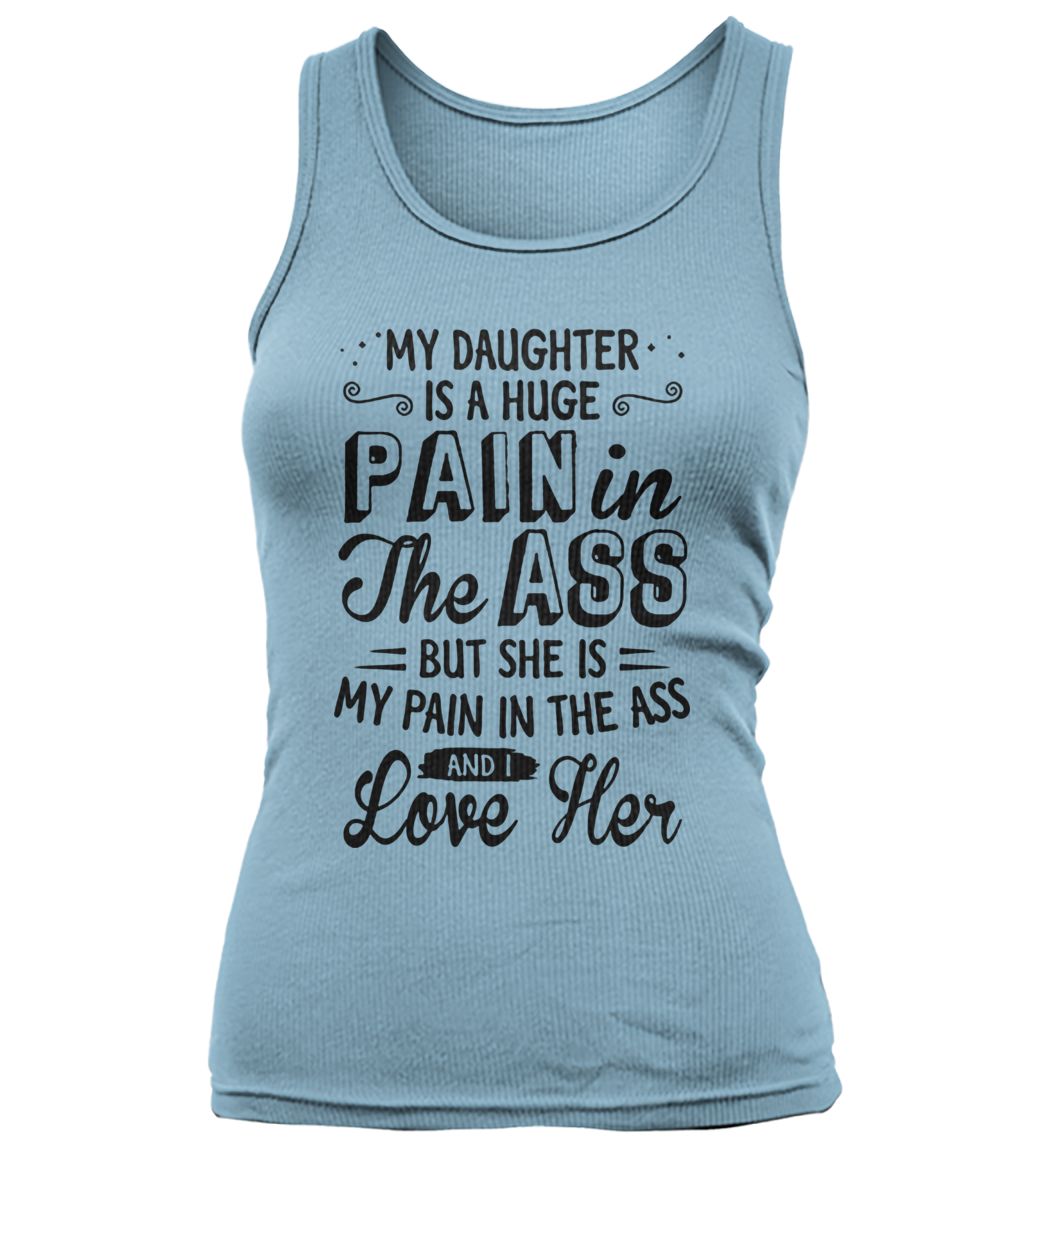 My daughter is a huge pain in the ass but she is my pain in the ass and I love her women's tank top